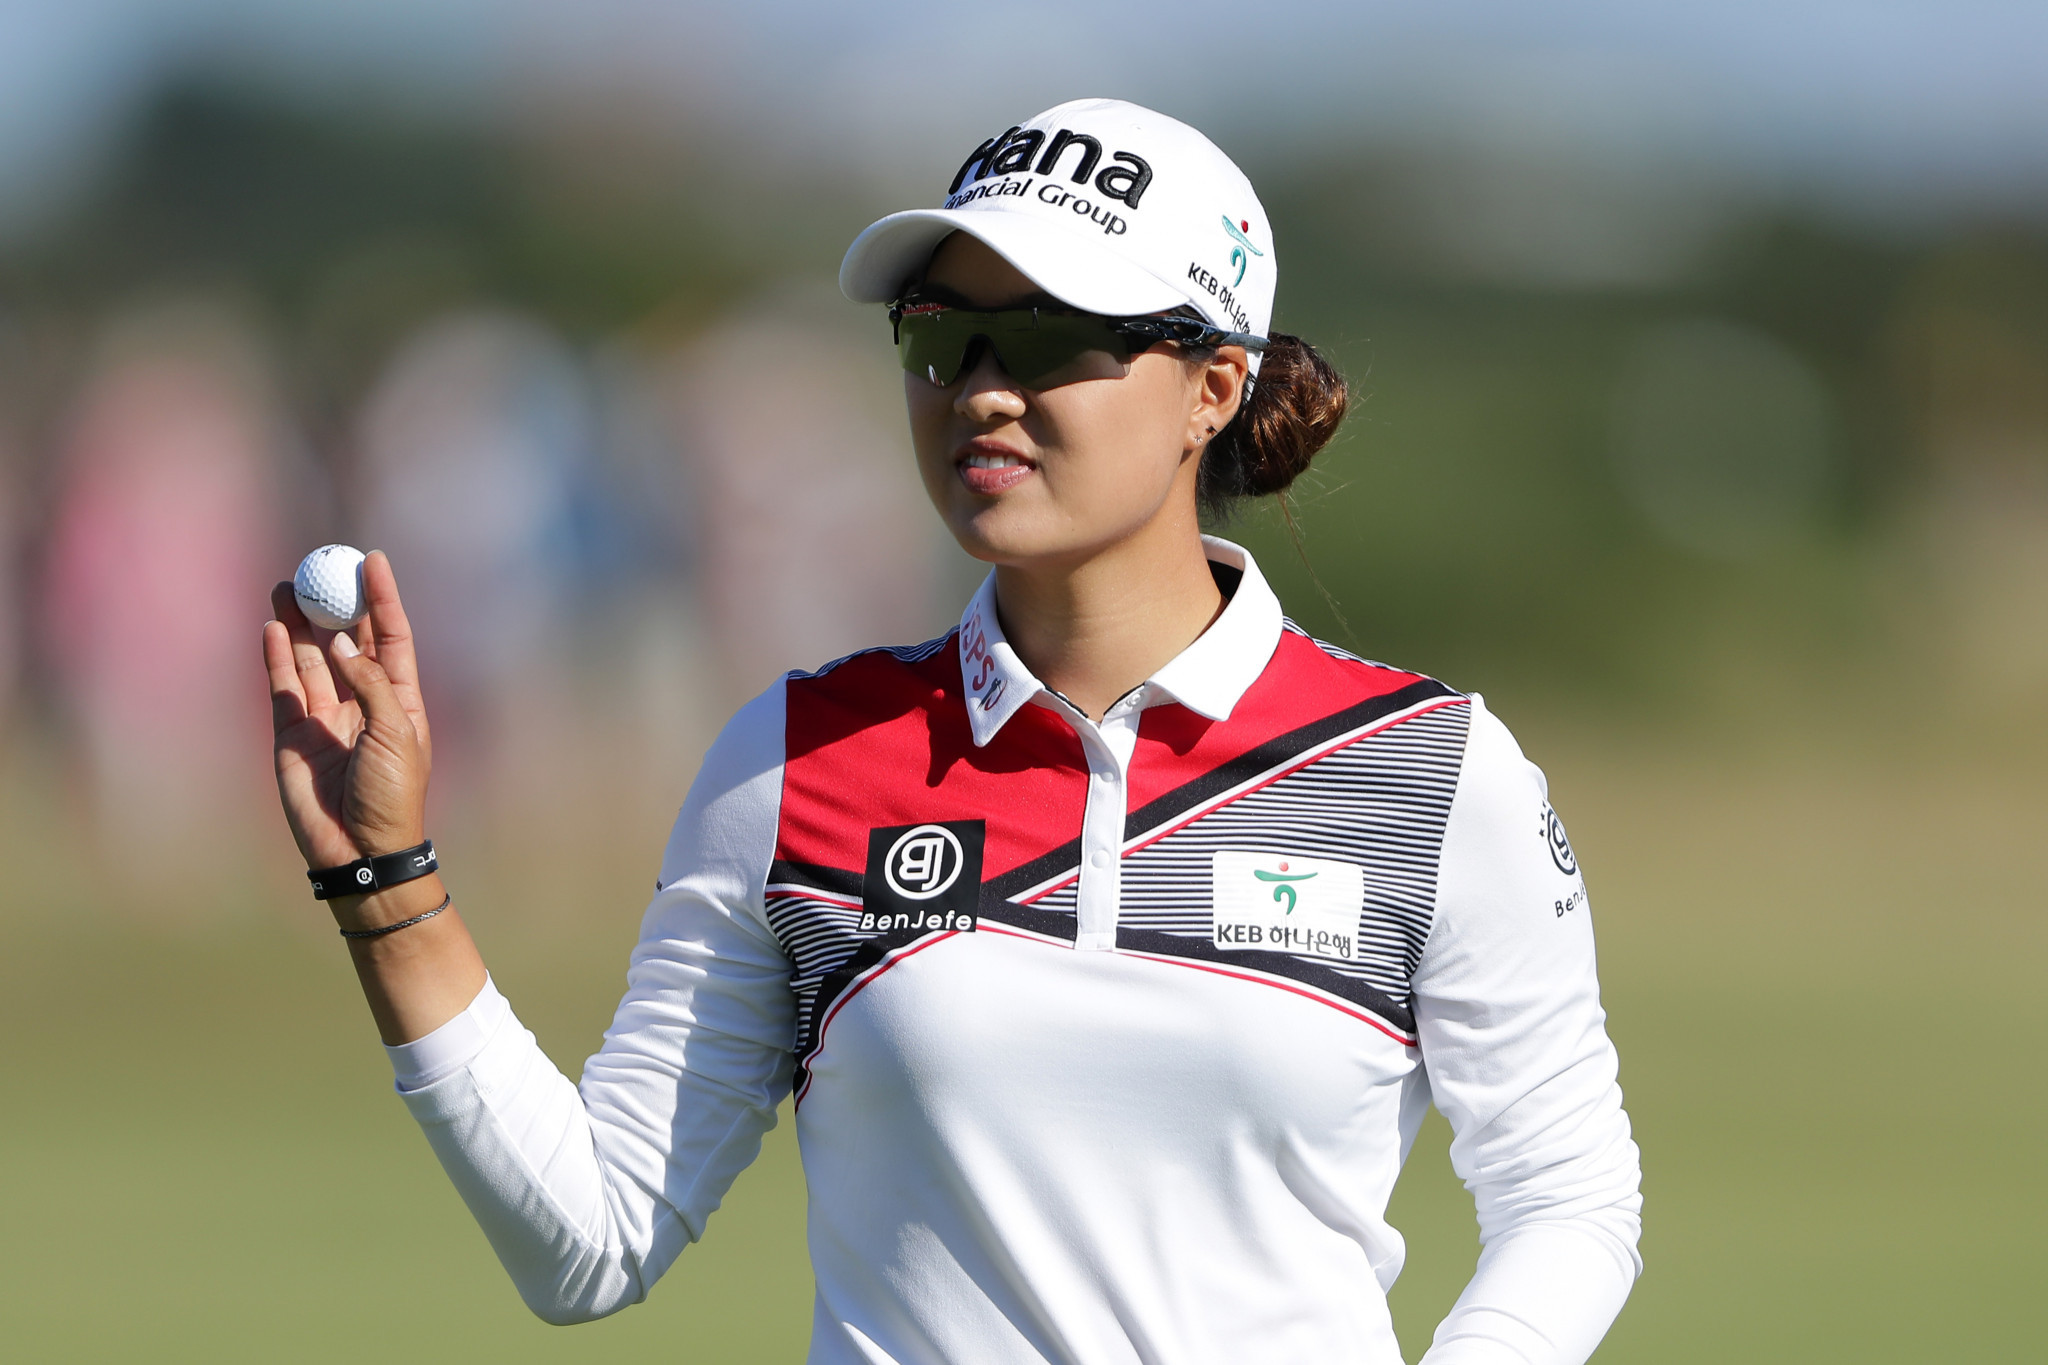 Australia's Minjee Lee is the clubhouse leader after day one of the Women's British Open ©Getty Images